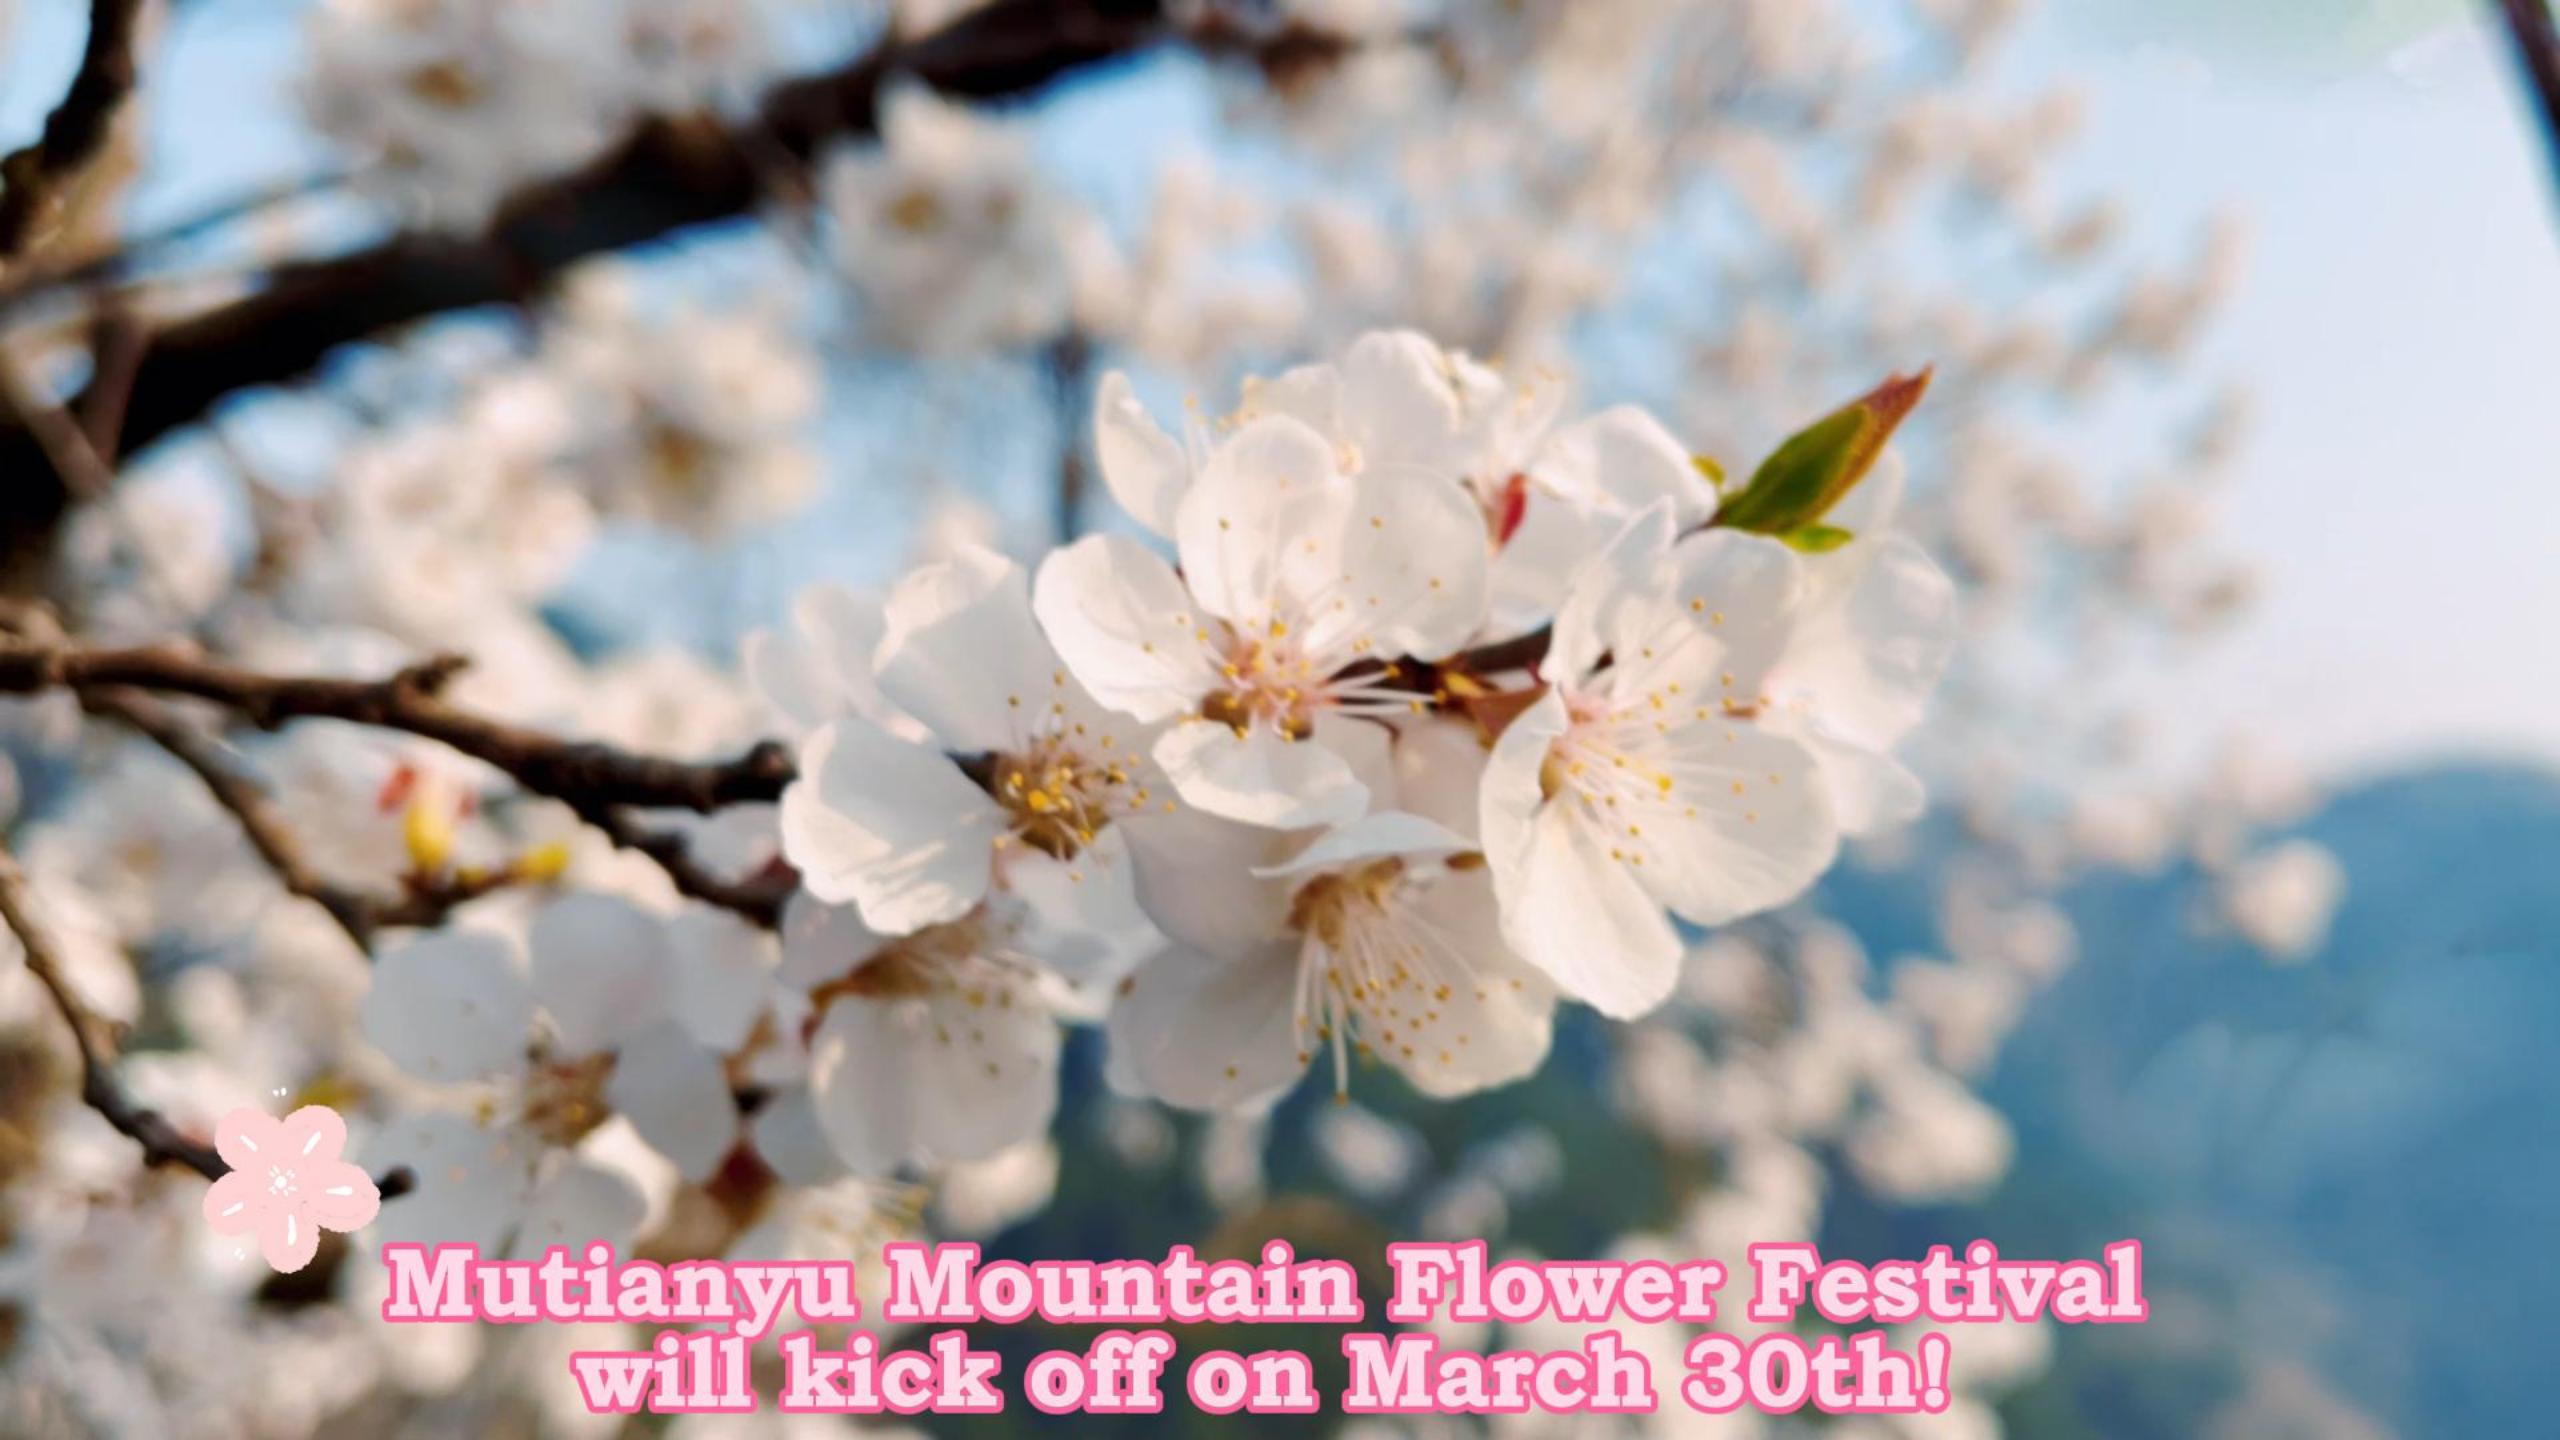 Mutianyu Mountain Flower Festival will kick off on March 30th